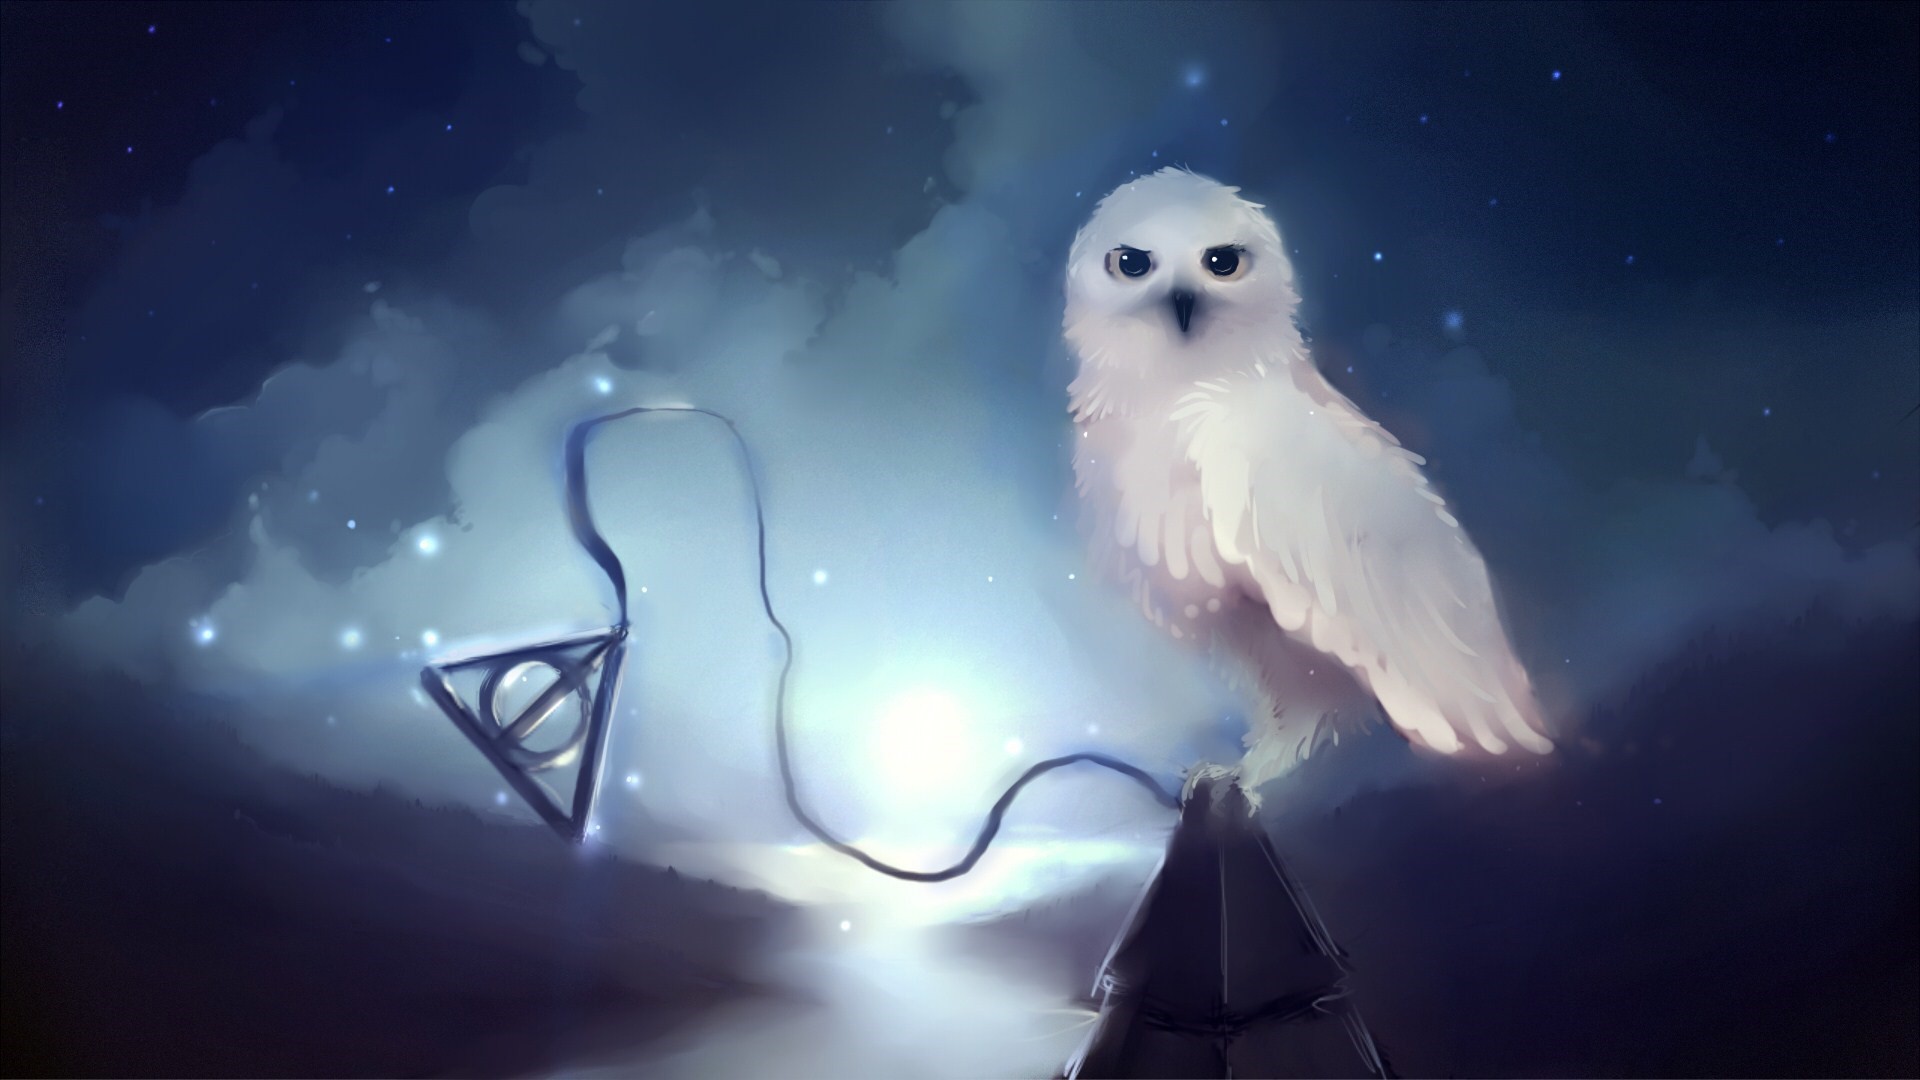 Harry Potter Owl Apofiss Harry Potter And The Deathly Hallows Animals Fantasy Art 1920x1080